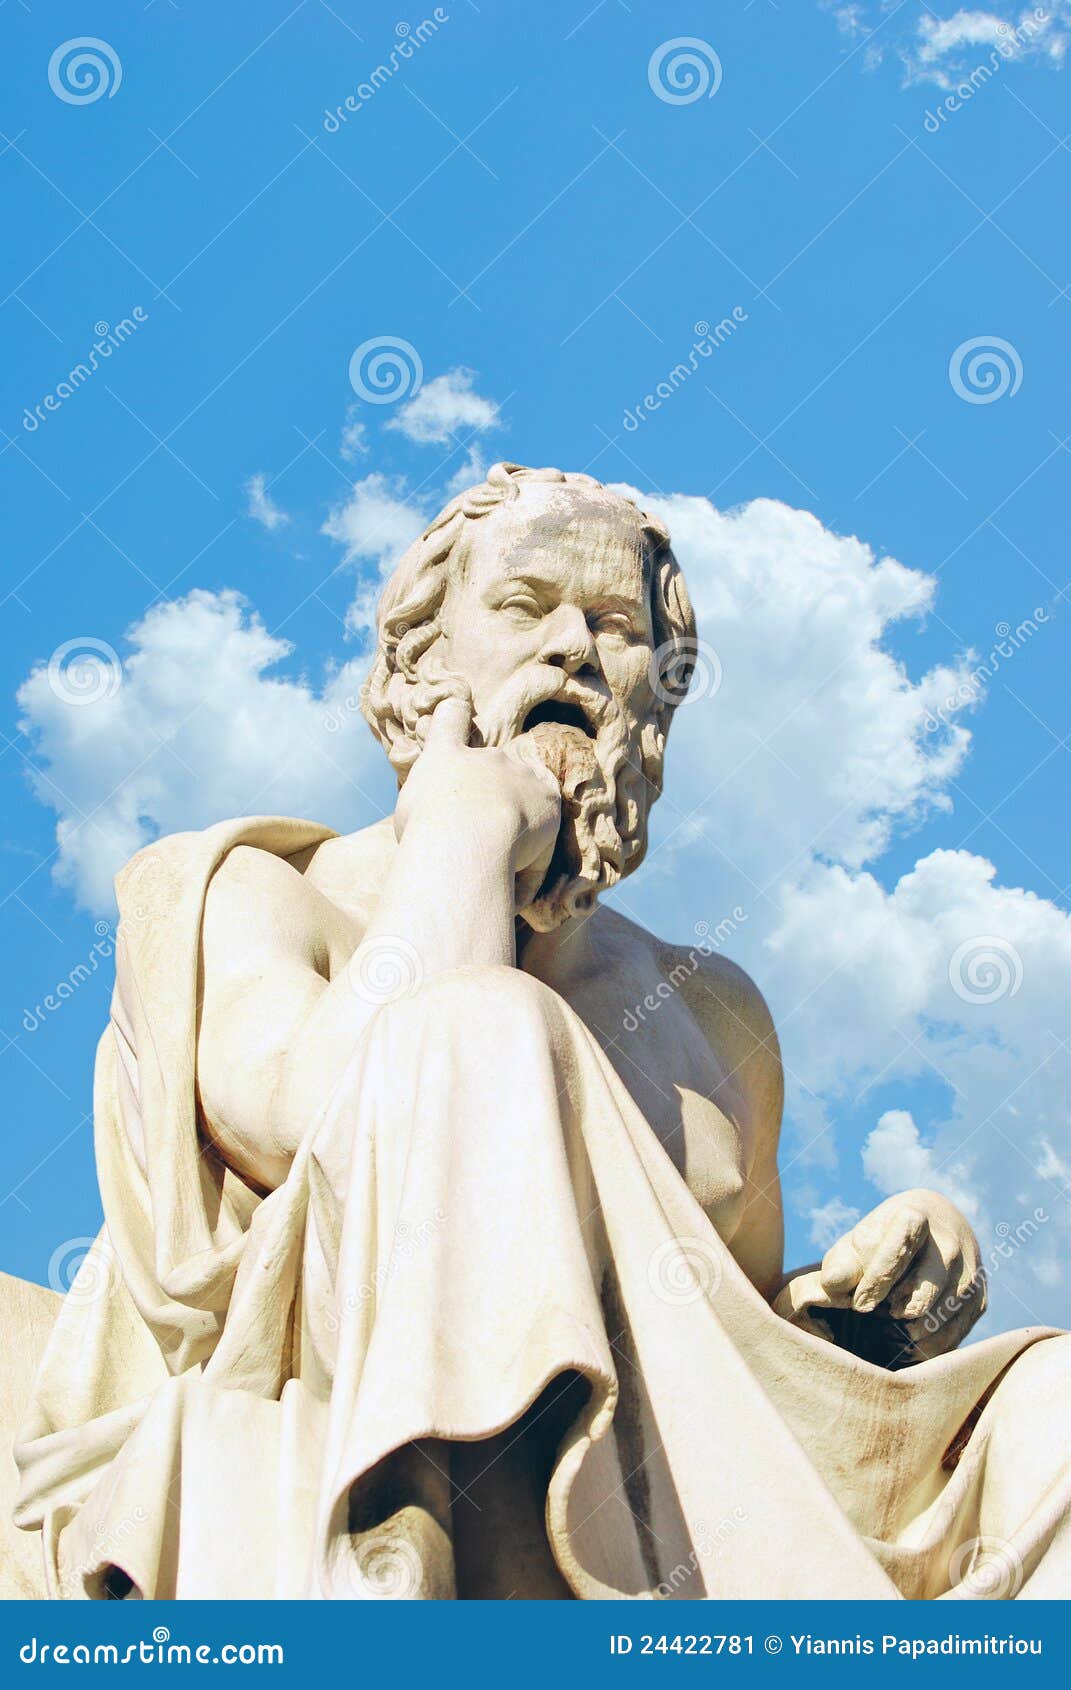 socrates statue at the academy of athens